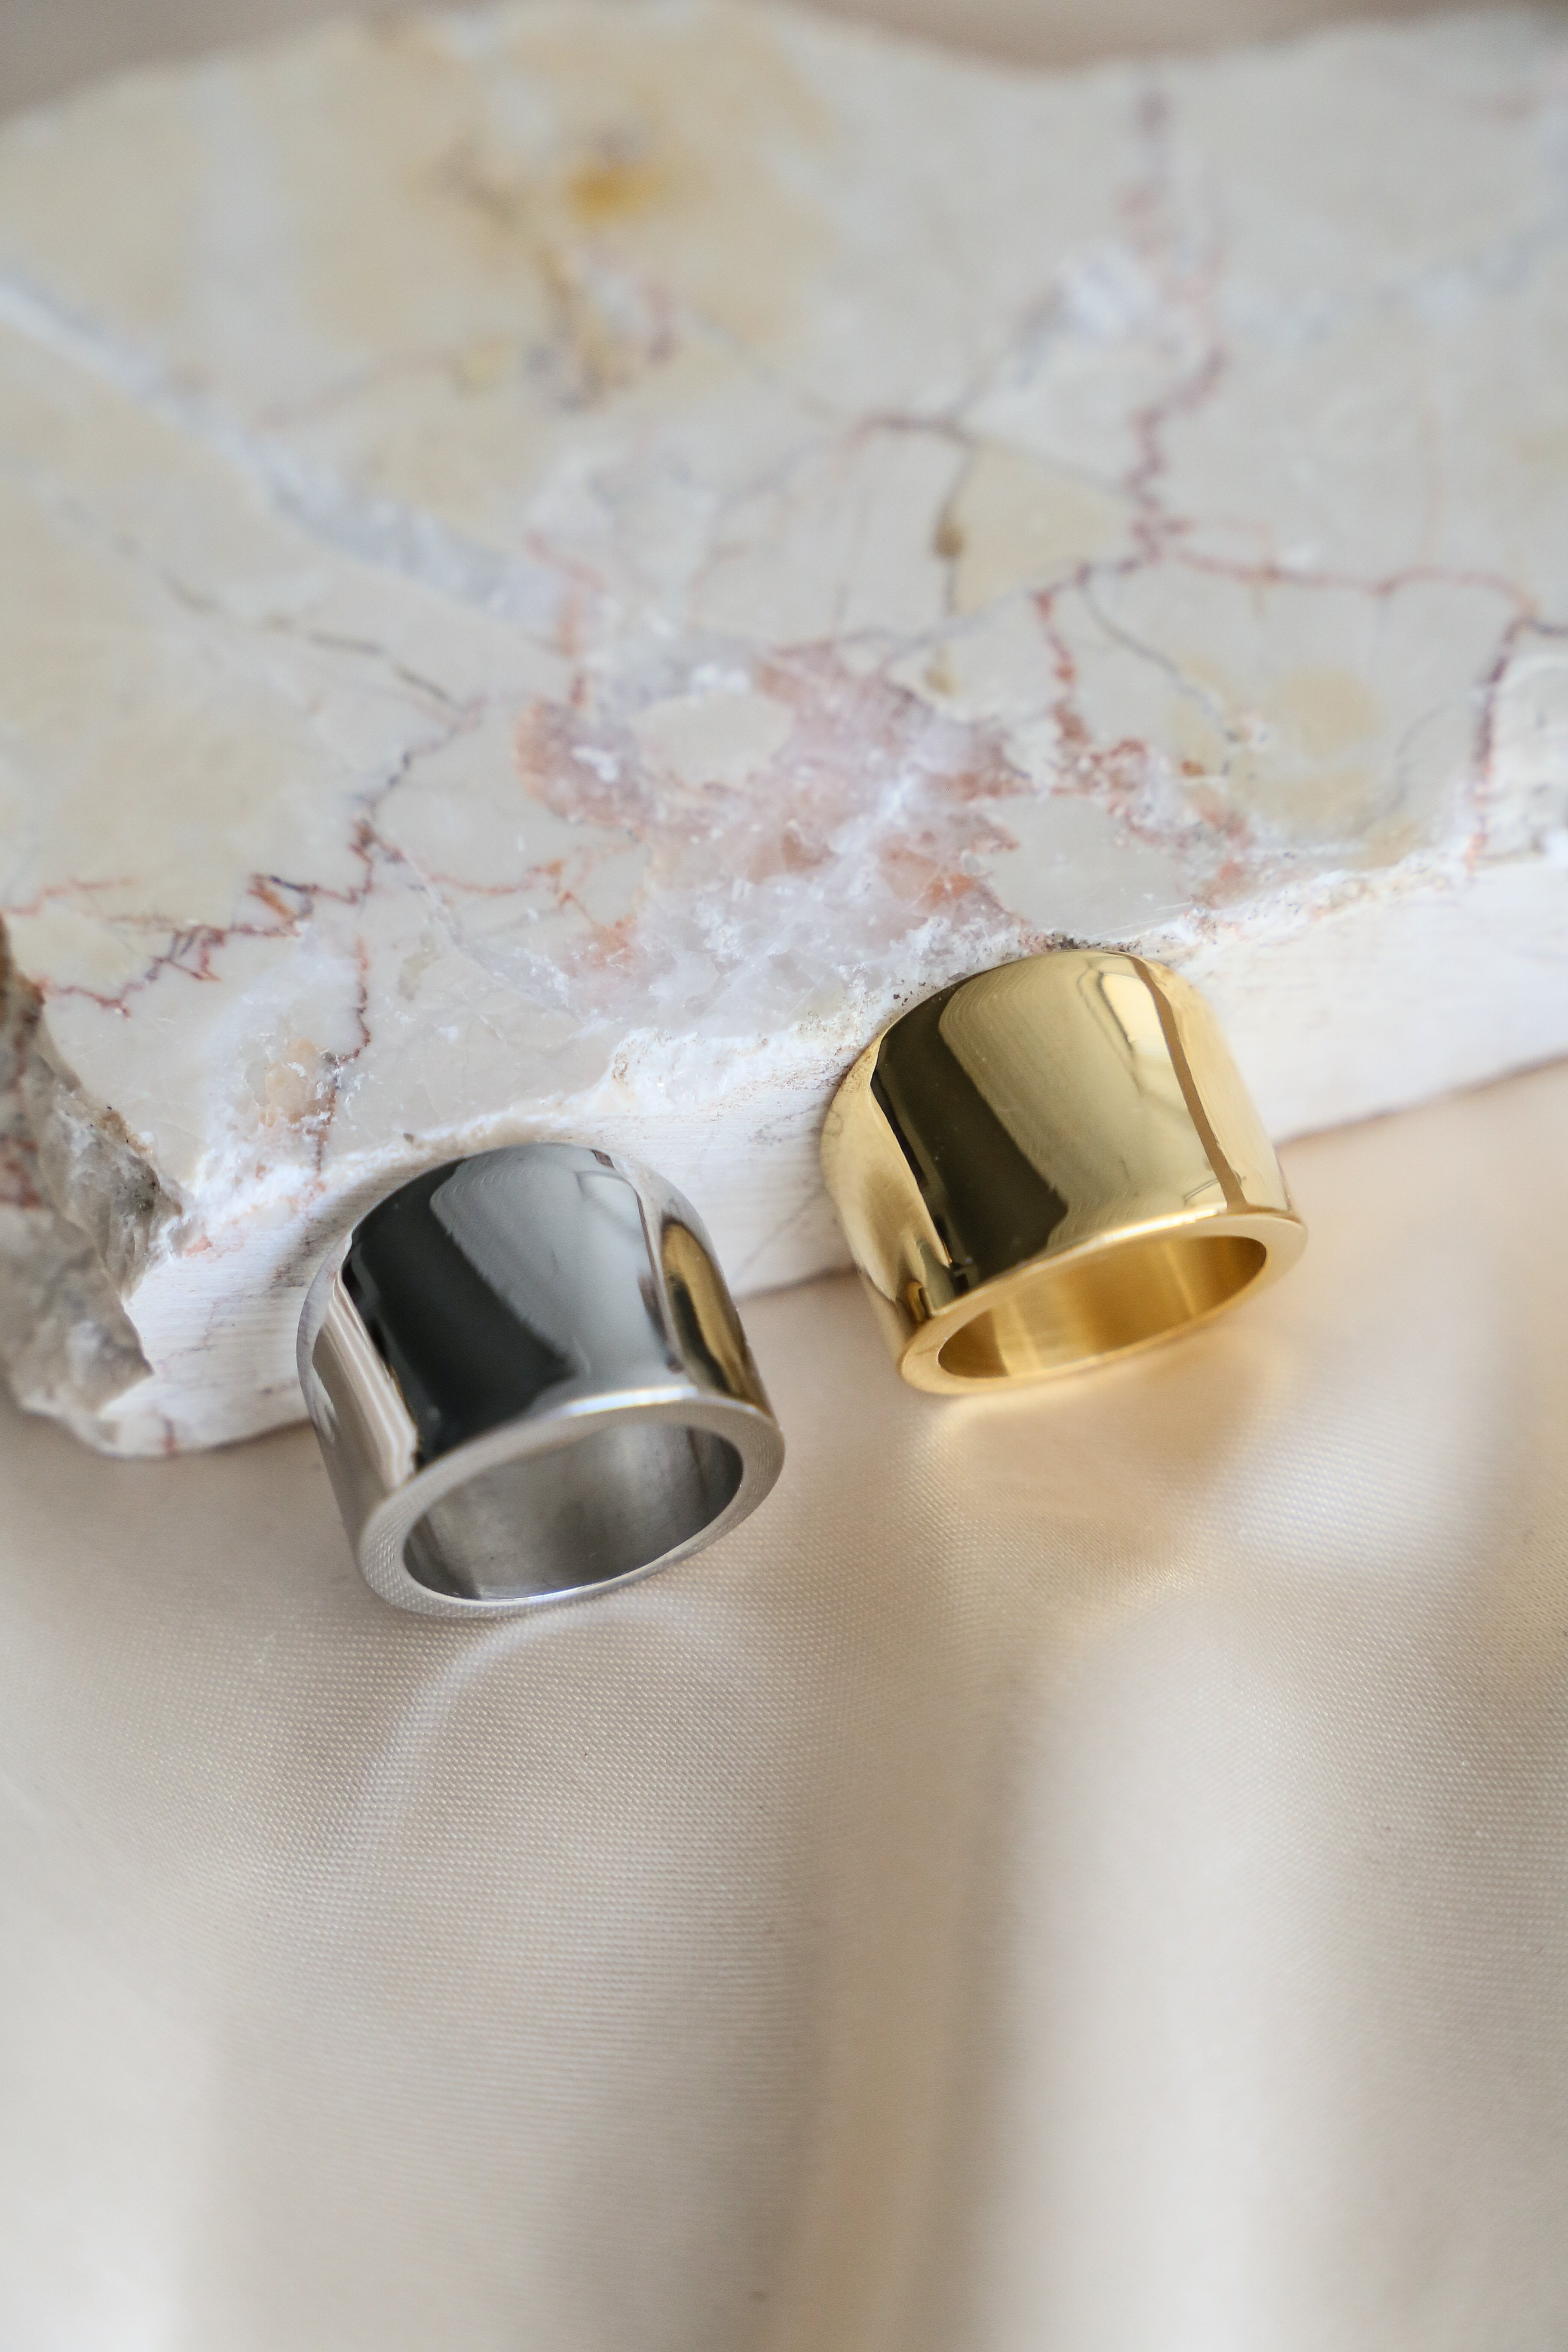 Romy Ring - Boutique Minimaliste has waterproof, durable, elegant and vintage inspired jewelry